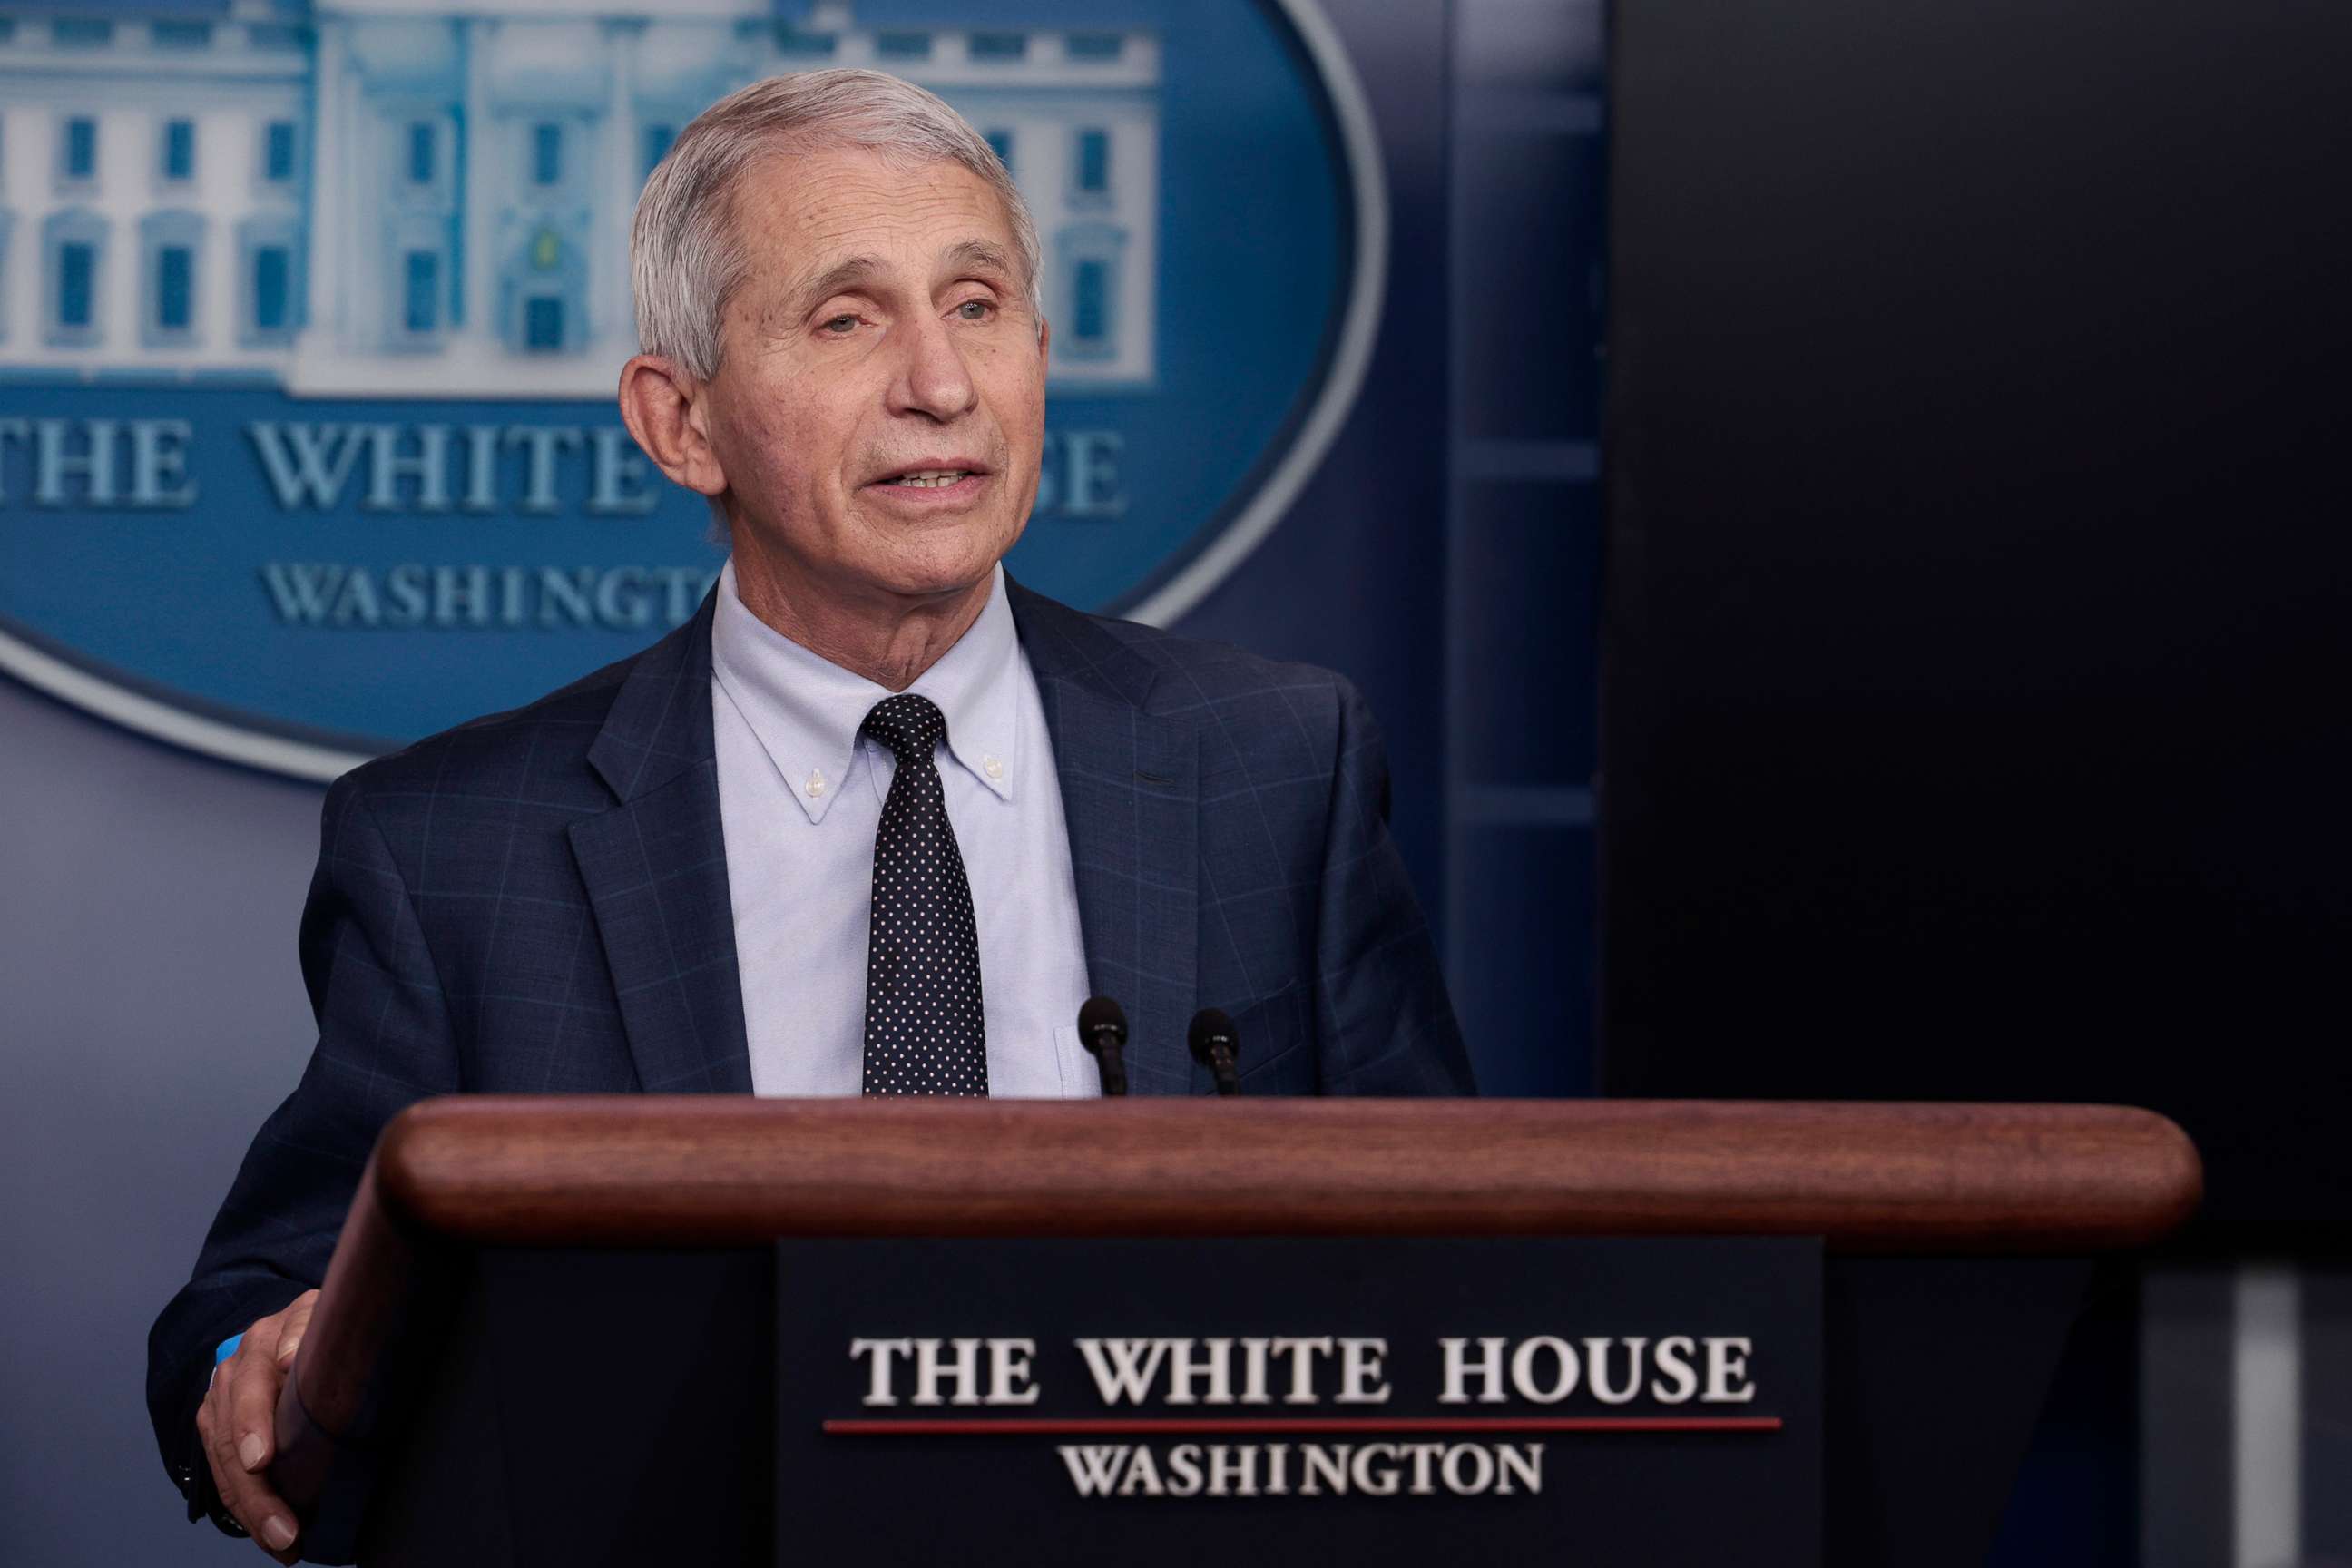 PHOTO: Dr. Anthony Fauci, Director of the National Institute of Allergy and Infectious Diseases and the Chief Medical Advisor to the President, participated in a COVID-19 press briefing at the White House on Dec. 01, 2021 in Washington.